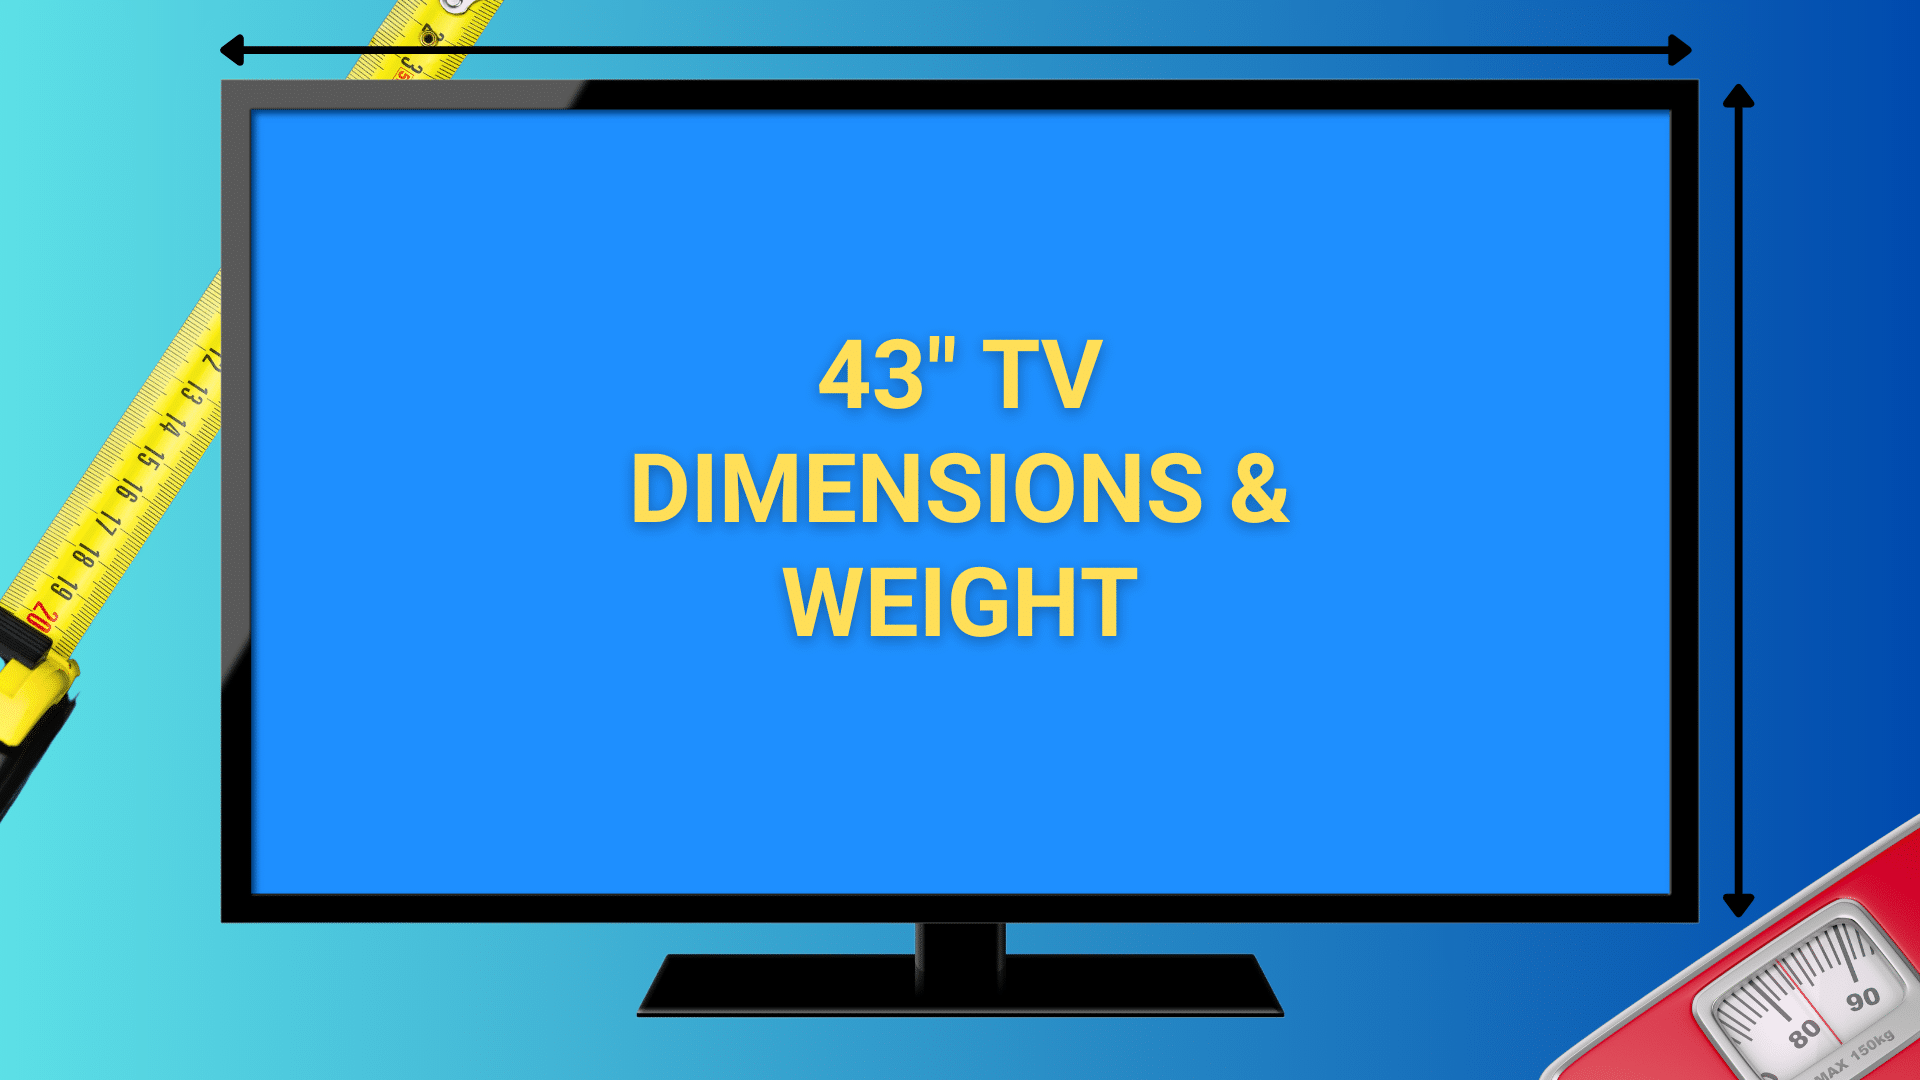 Image of 43 inch TV with measuring tape and bath scale in background.